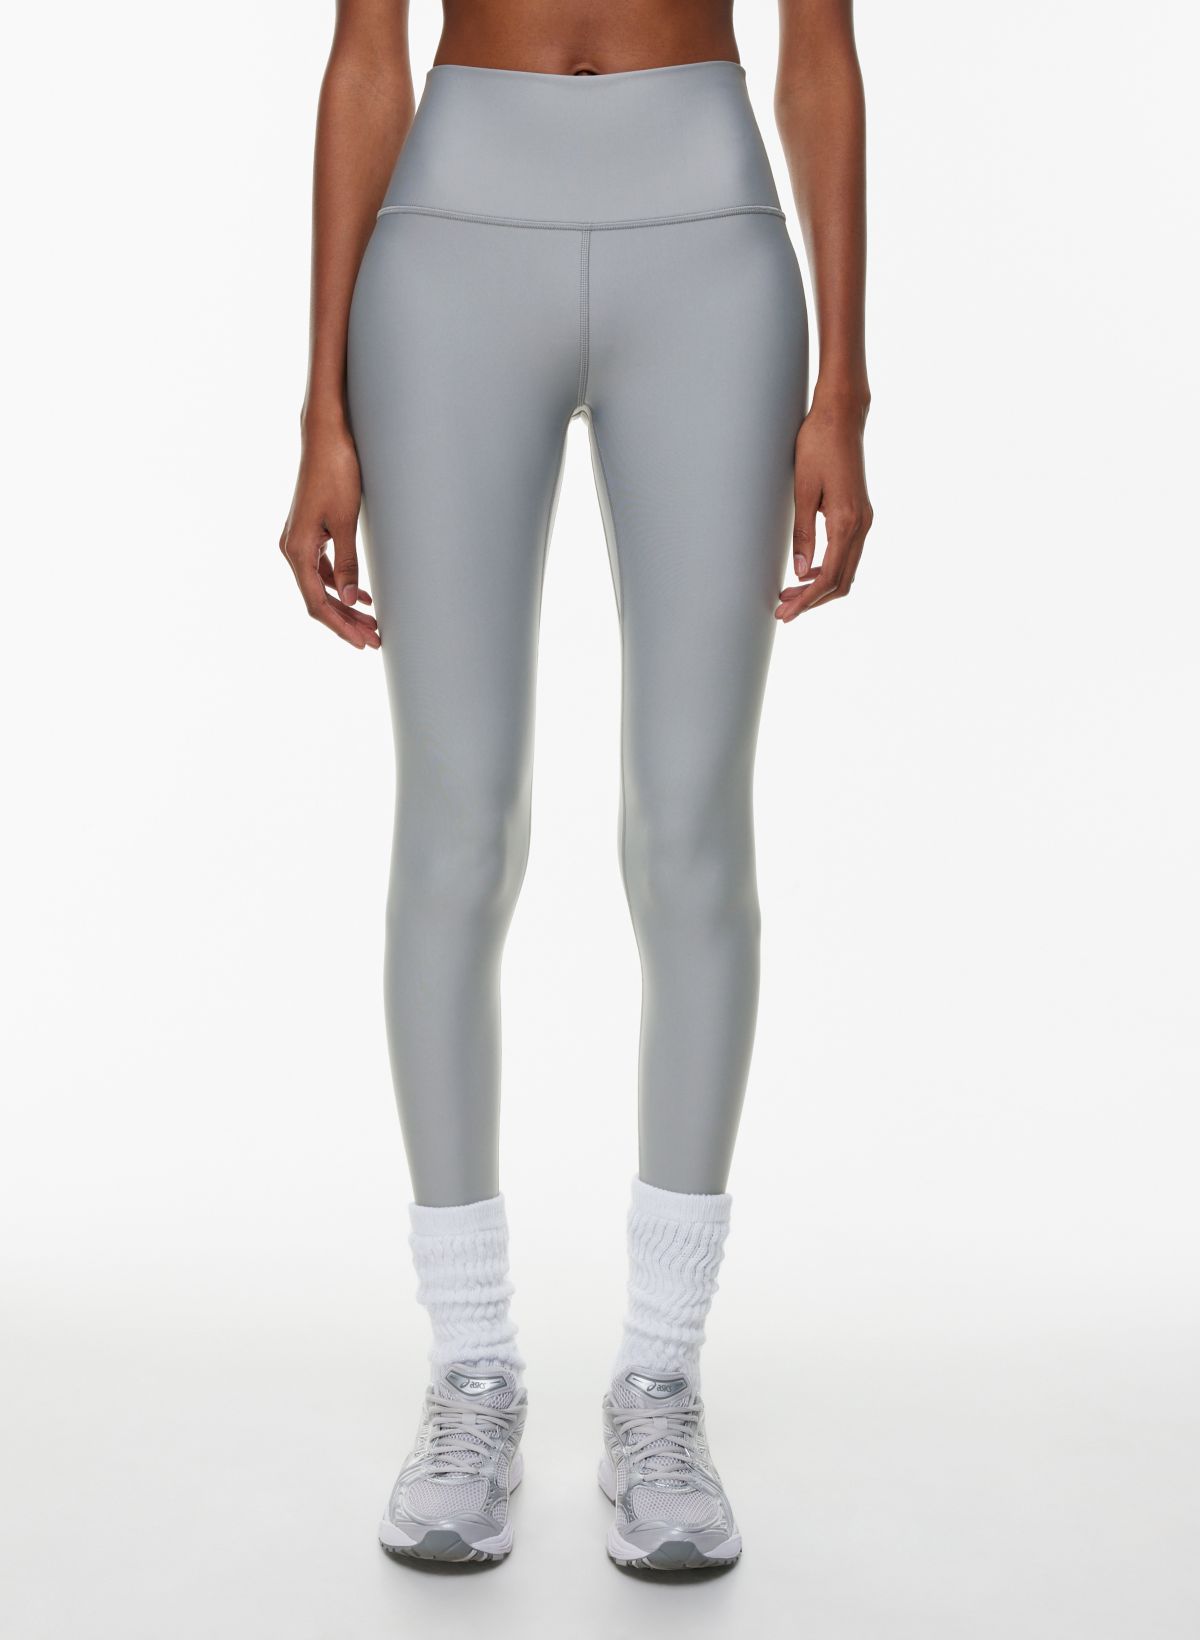 NEW With Tags - LuluLemon Align Leggings, Size 2 for Sale in San